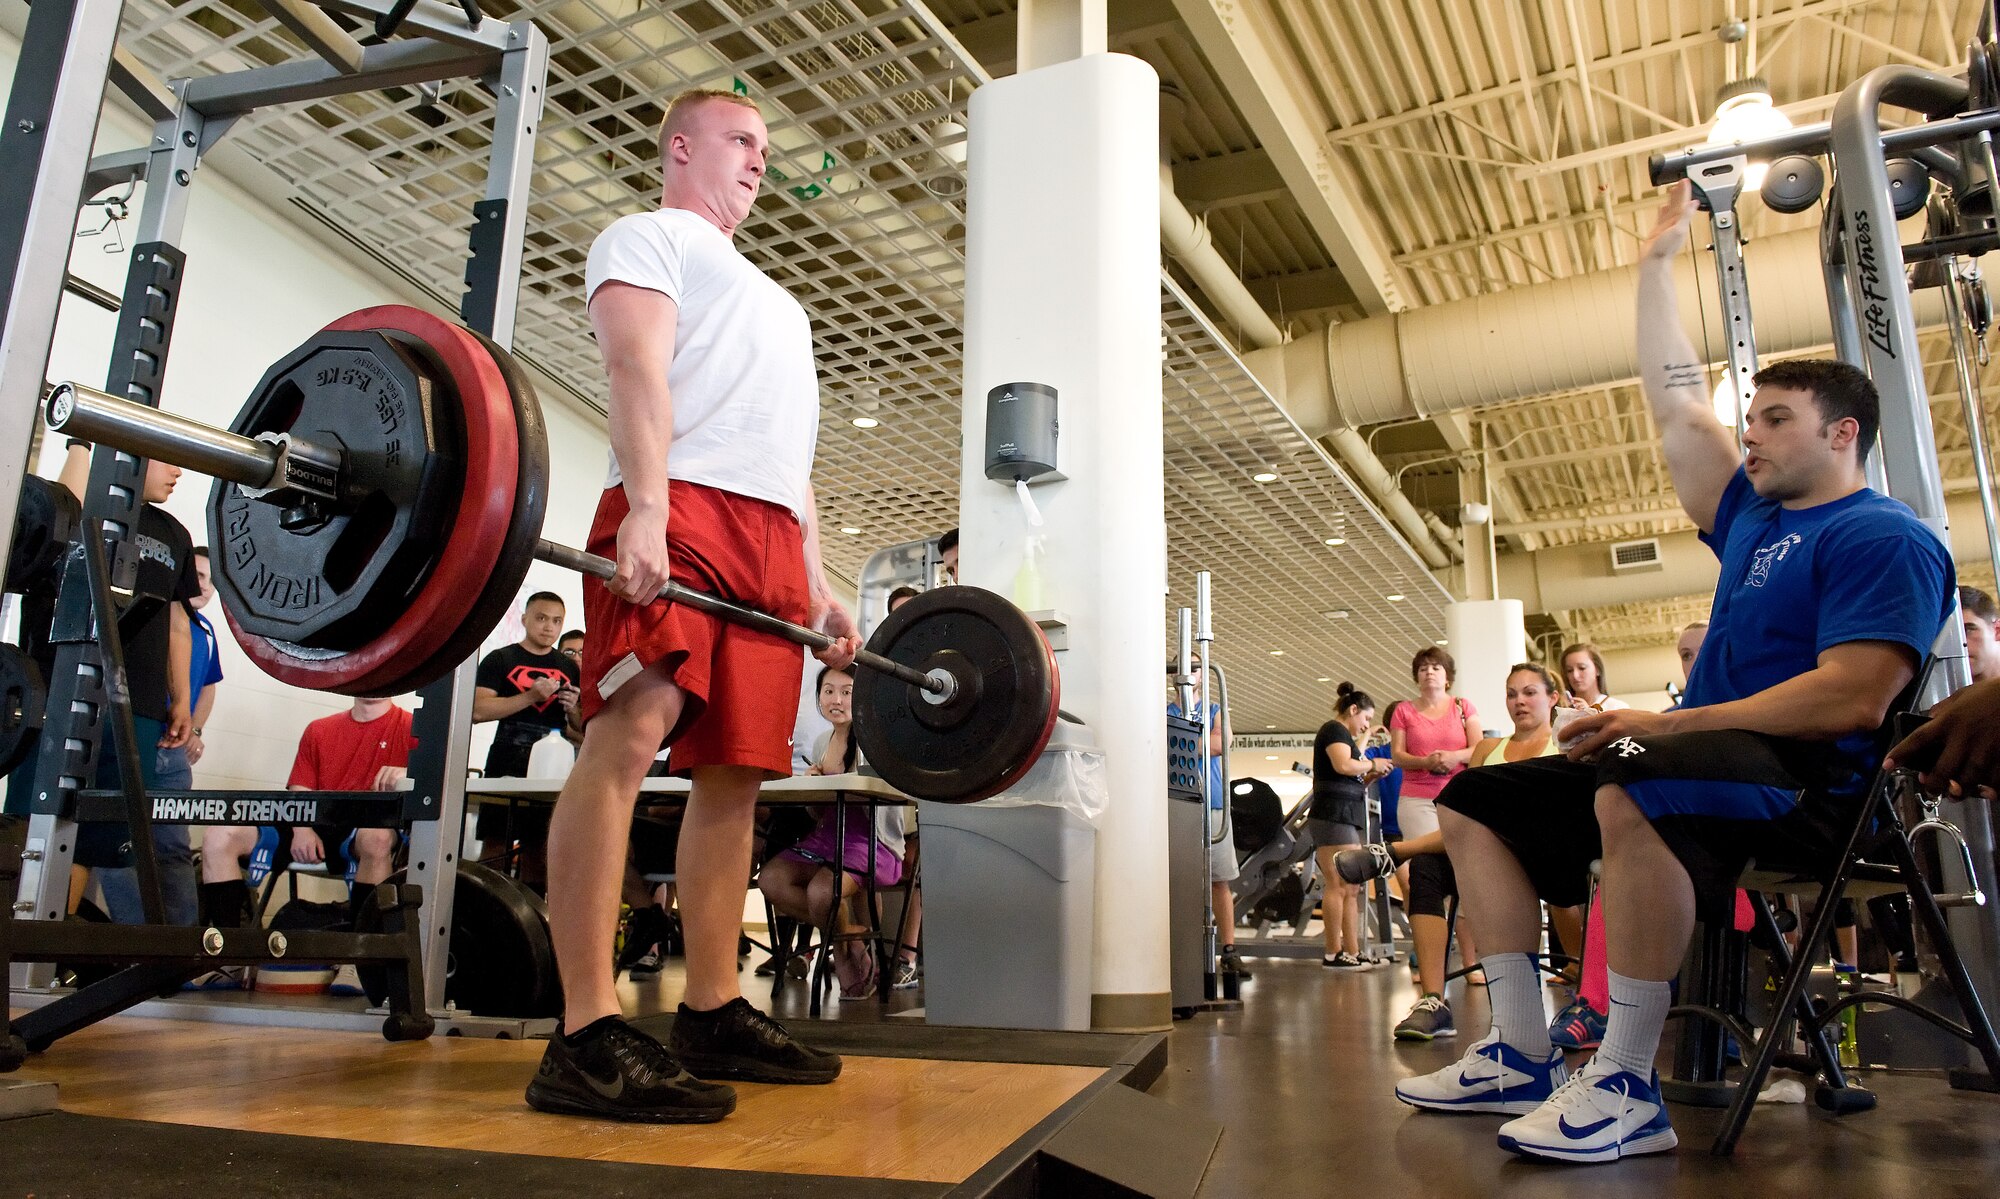 Lance Wright, left, waits for judge Scott Day, right, to signal a good lift of 405 pounds on his first of three deadlift attempts during the powerlifting competition May 8, 2015, at the Fitness Center on Dover Air Force Base, Del. Wright placed fifth in the male 181-pound weight class with a combined total of 1,000 pounds for the squat, bench press and deadlift. (U.S. Air Force photo/Roland Balik)